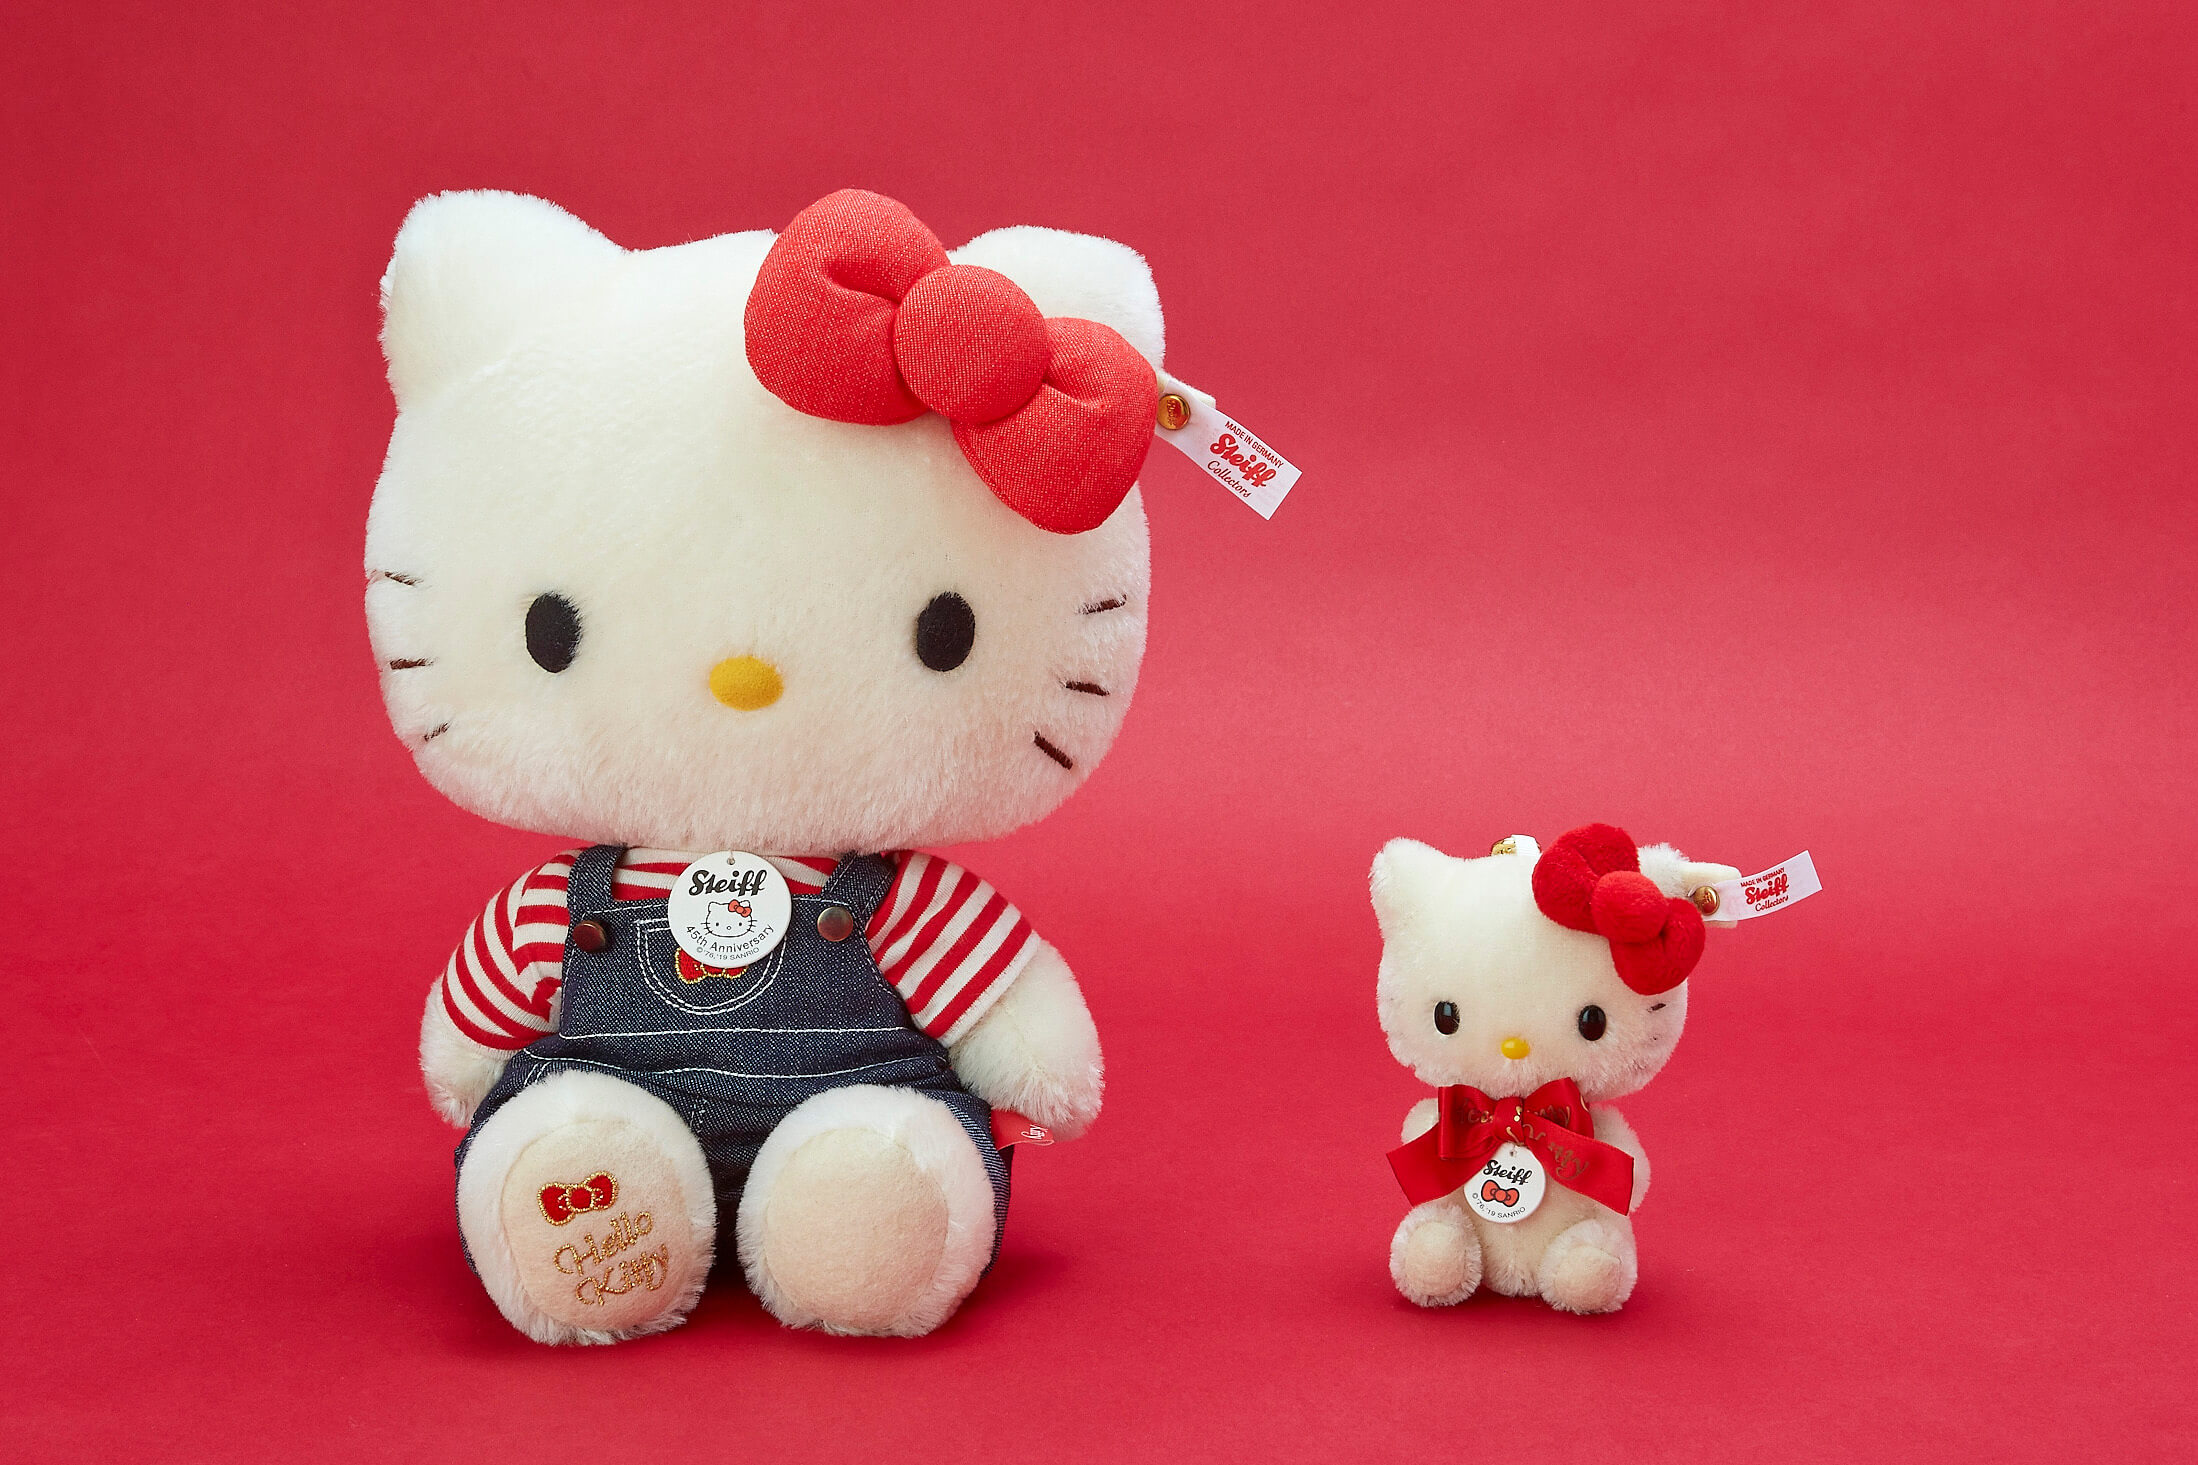 Adorable Hello Kitty Plush Toy Key Ring Releasing By